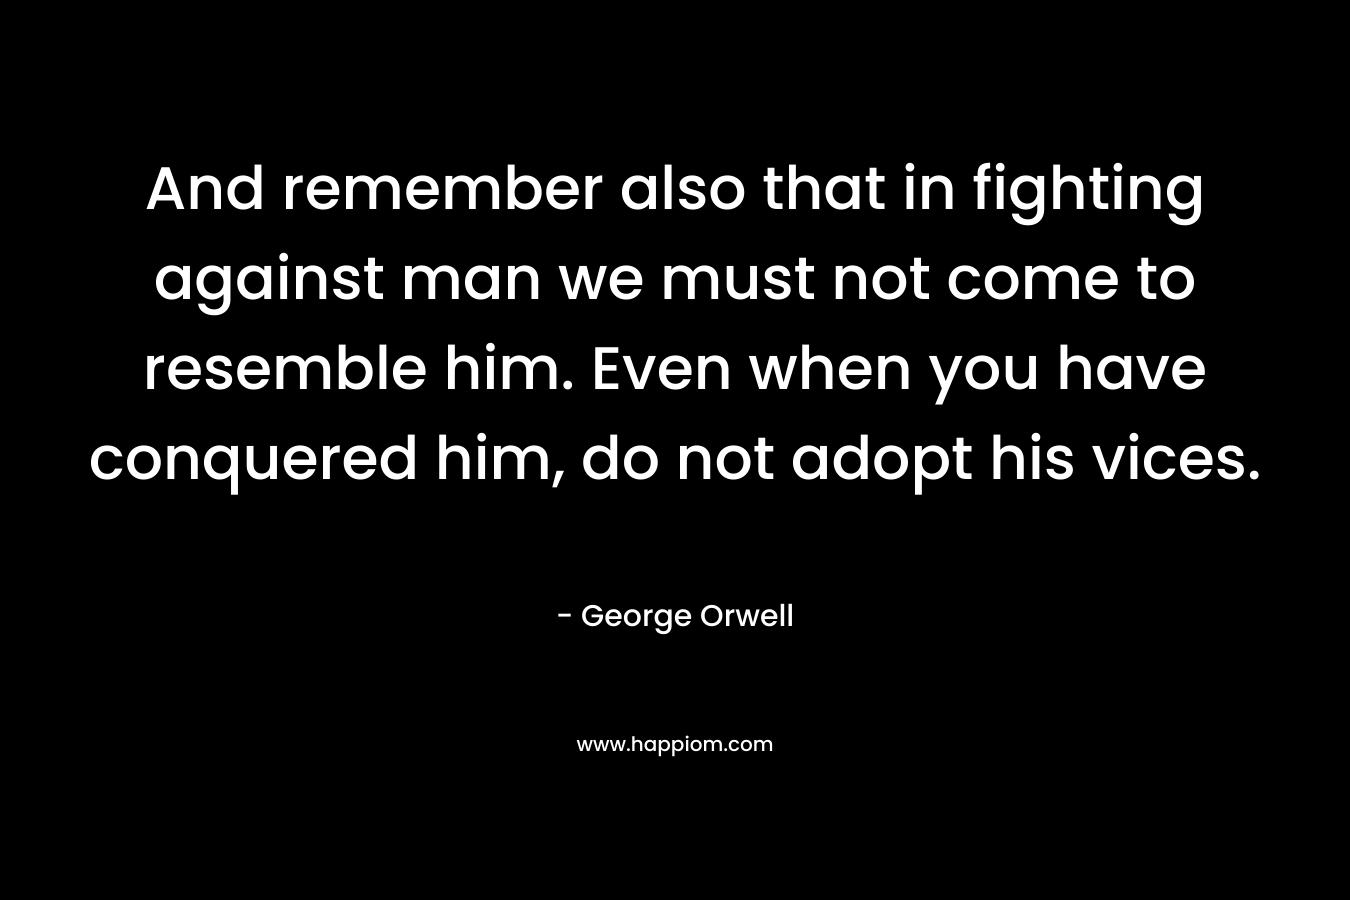 And remember also that in fighting against man we must not come to resemble him. Even when you have conquered him, do not adopt his vices. – George Orwell